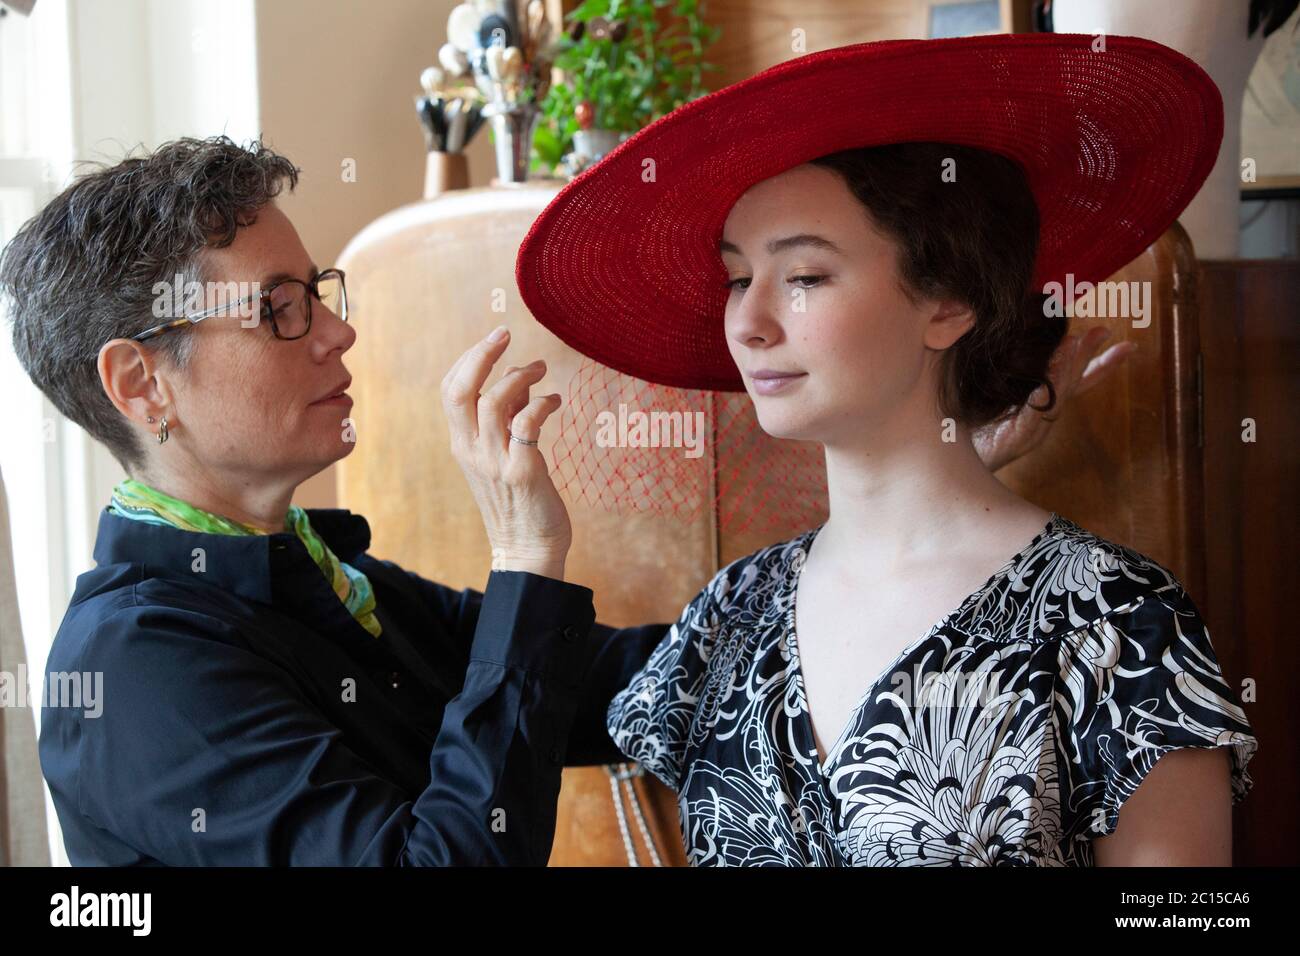 London, UK, 14 June 2020: Milliner Leanne Fredrick prepares one of her hats, modelled by her daughter Eliana, for the social media fundraiser 'Royal Ascot at Home' which will run from 16th to 20th June. As the horse-racing and social event has been cancelled due to coronavirus social distancing safety measures, people are encouraged to post photos of their hats and outfits with the hastag #StyledWithThanks and make a donation to Ascot's chosen Covid-19 charities. Anna Watson/Alamy Live News. Stock Photo